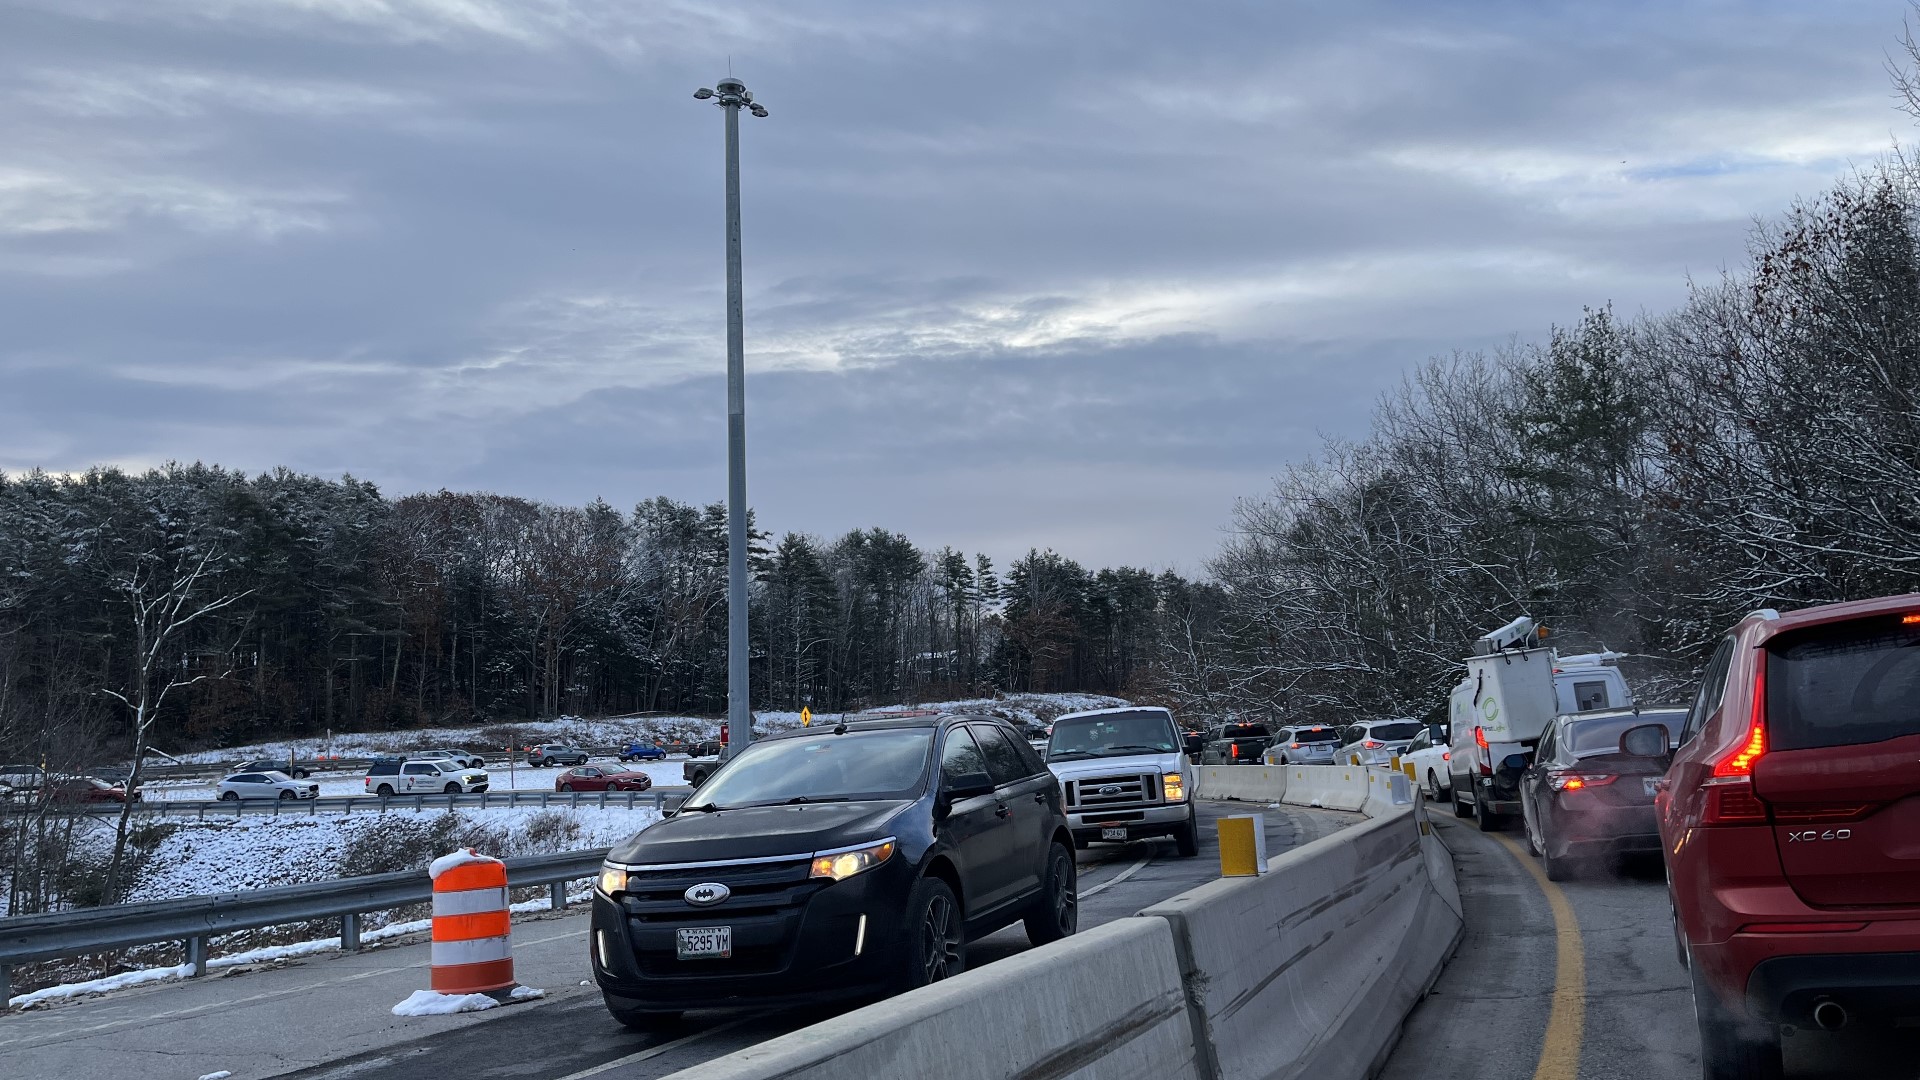 The southbound lanes of I-295 in Freeport are backed up Wednesday morning as officials respond to a crash.